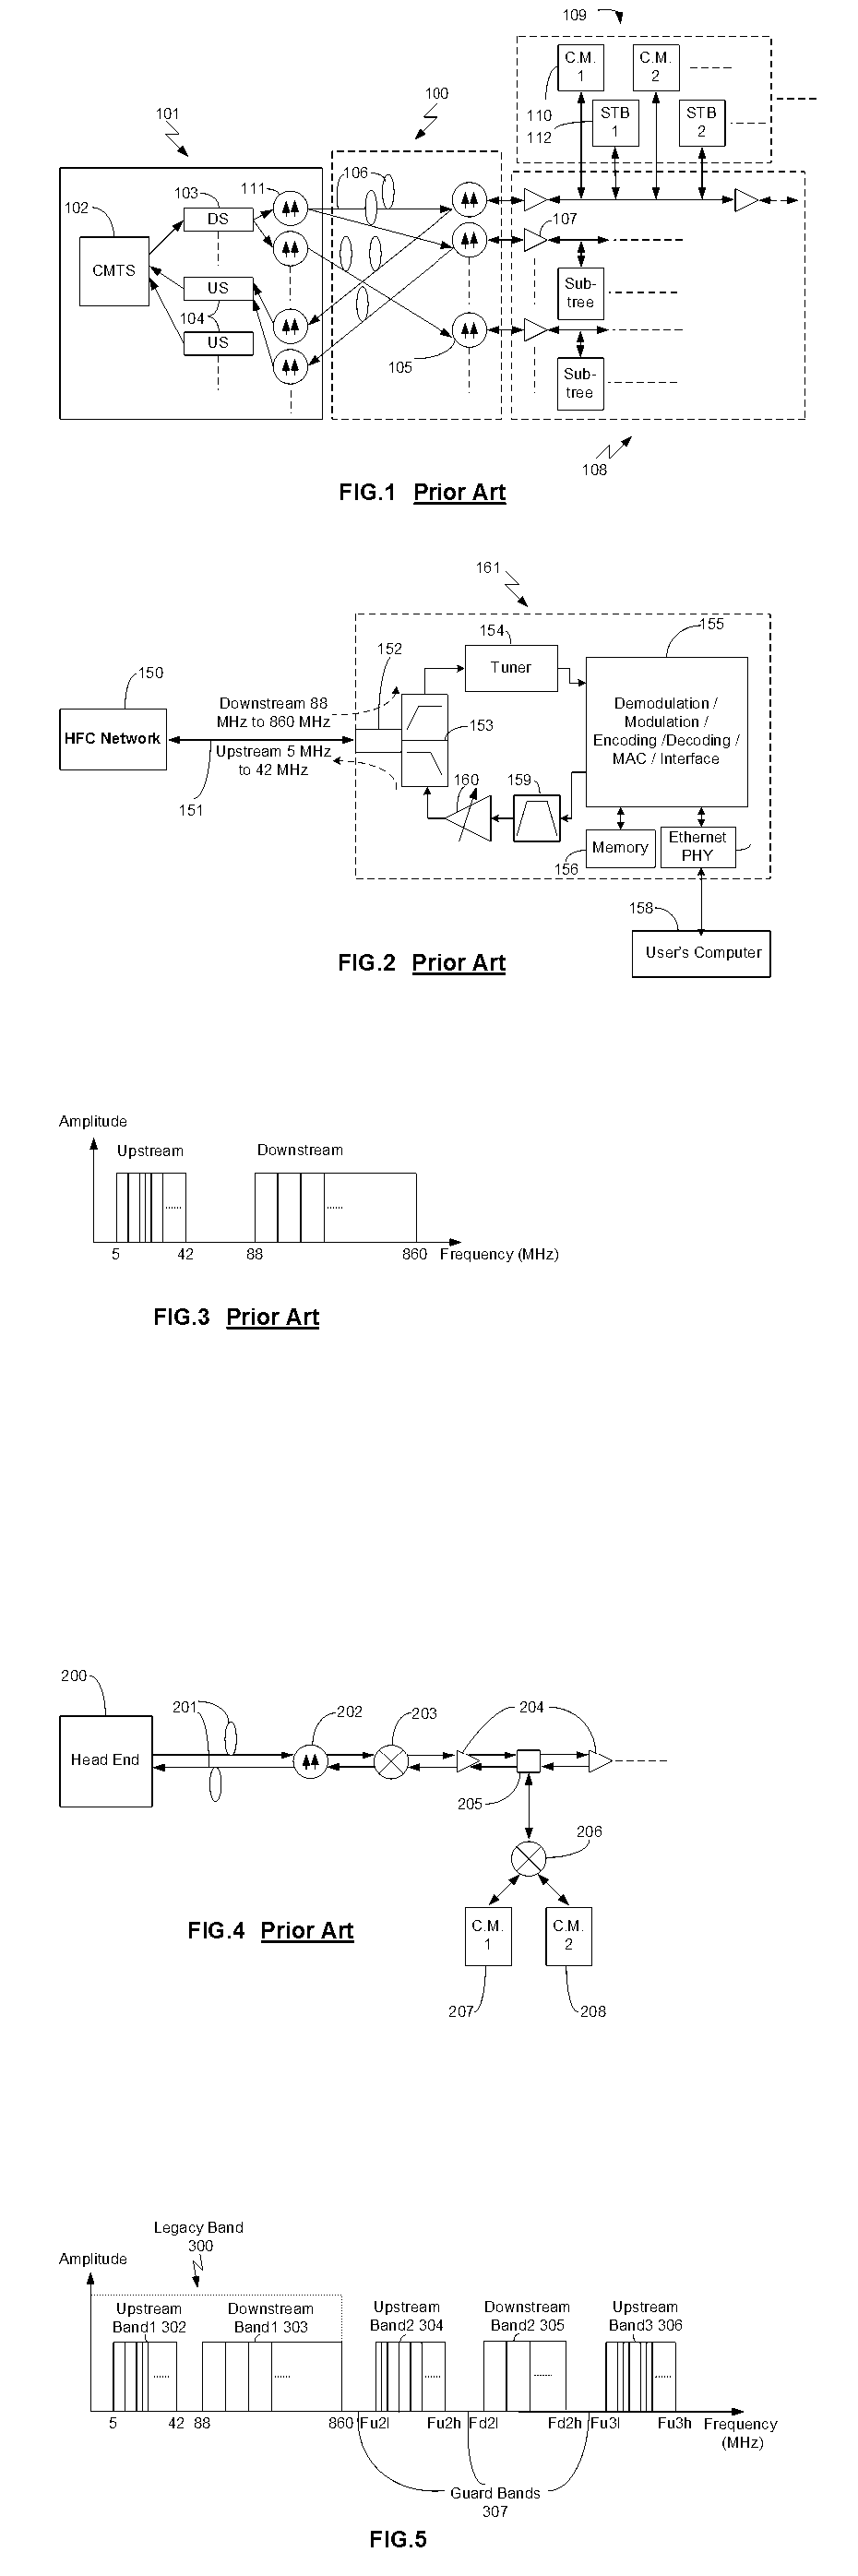 System and Method for Communication over a Network with Extended Frequency Range